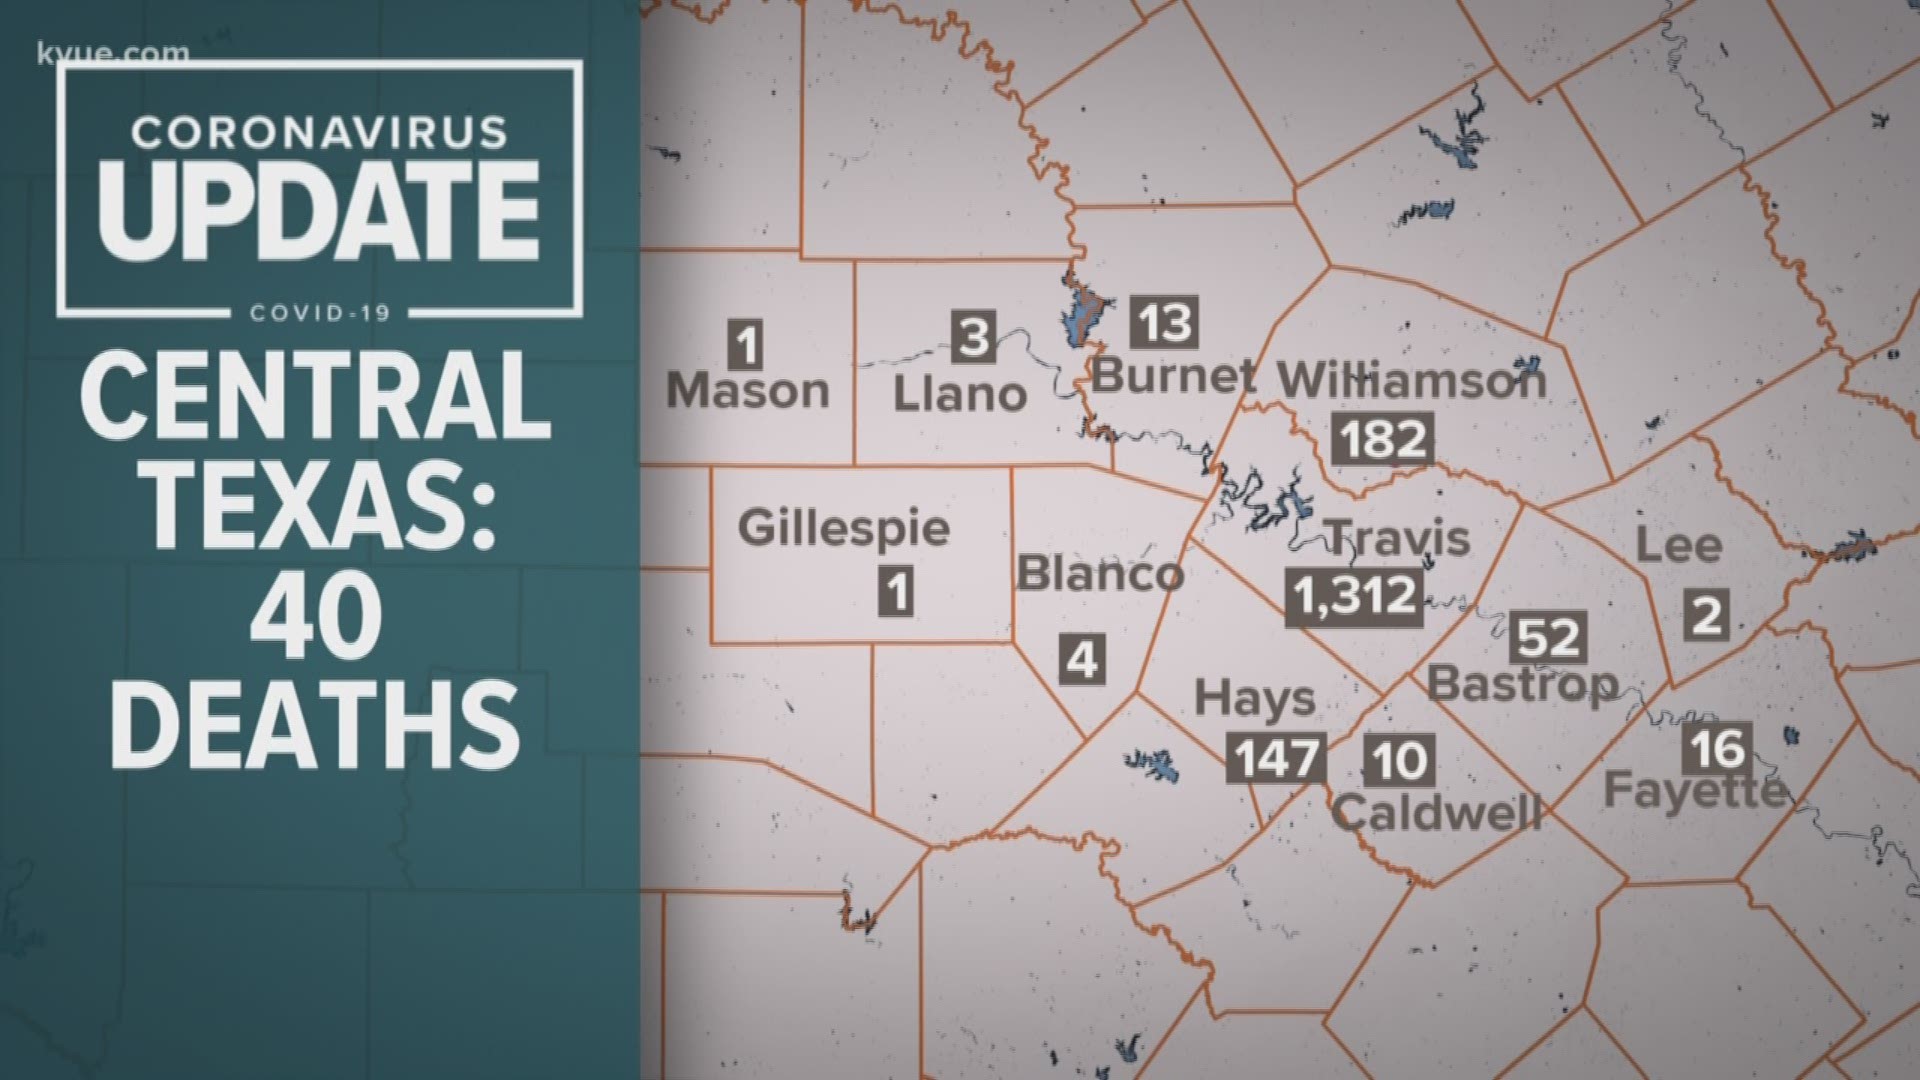 There are now more than 1,300 cases of coronavirus in Travis County.